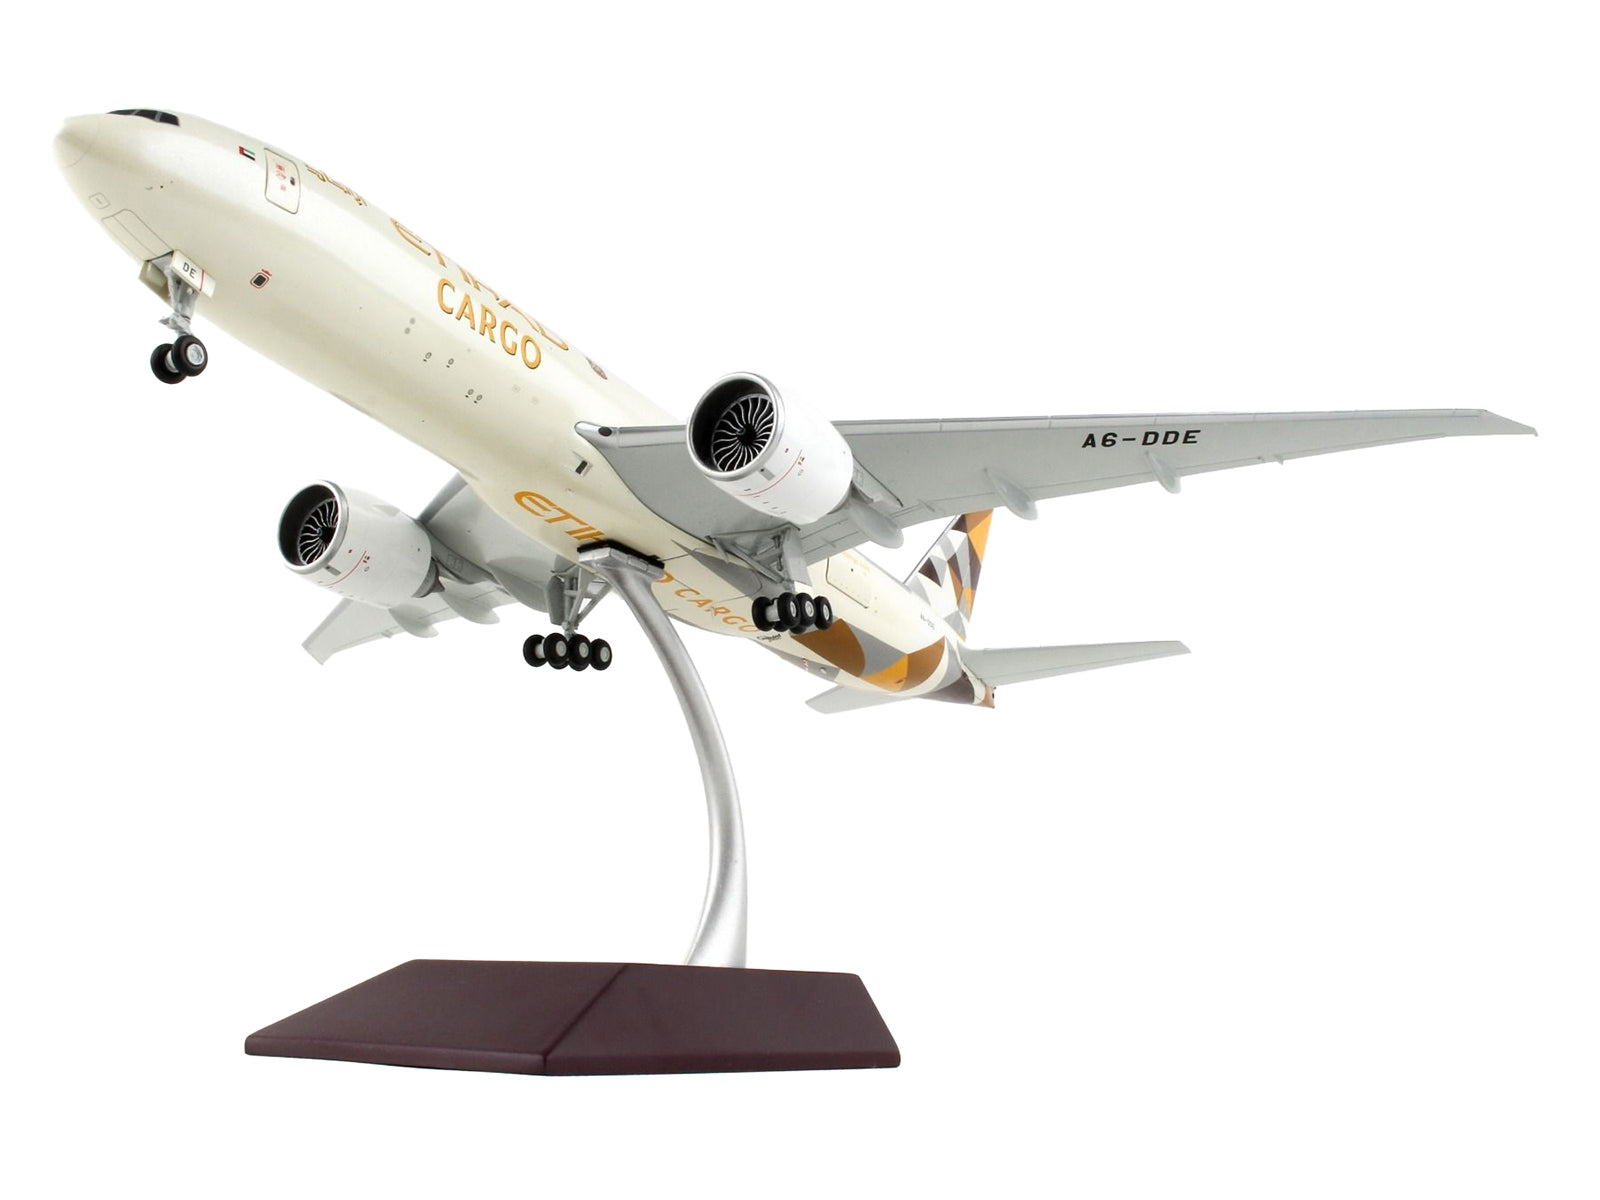 Boeing 777F Commercial Aircraft "Etihad Airways Cargo" Beige with Tail Graphics